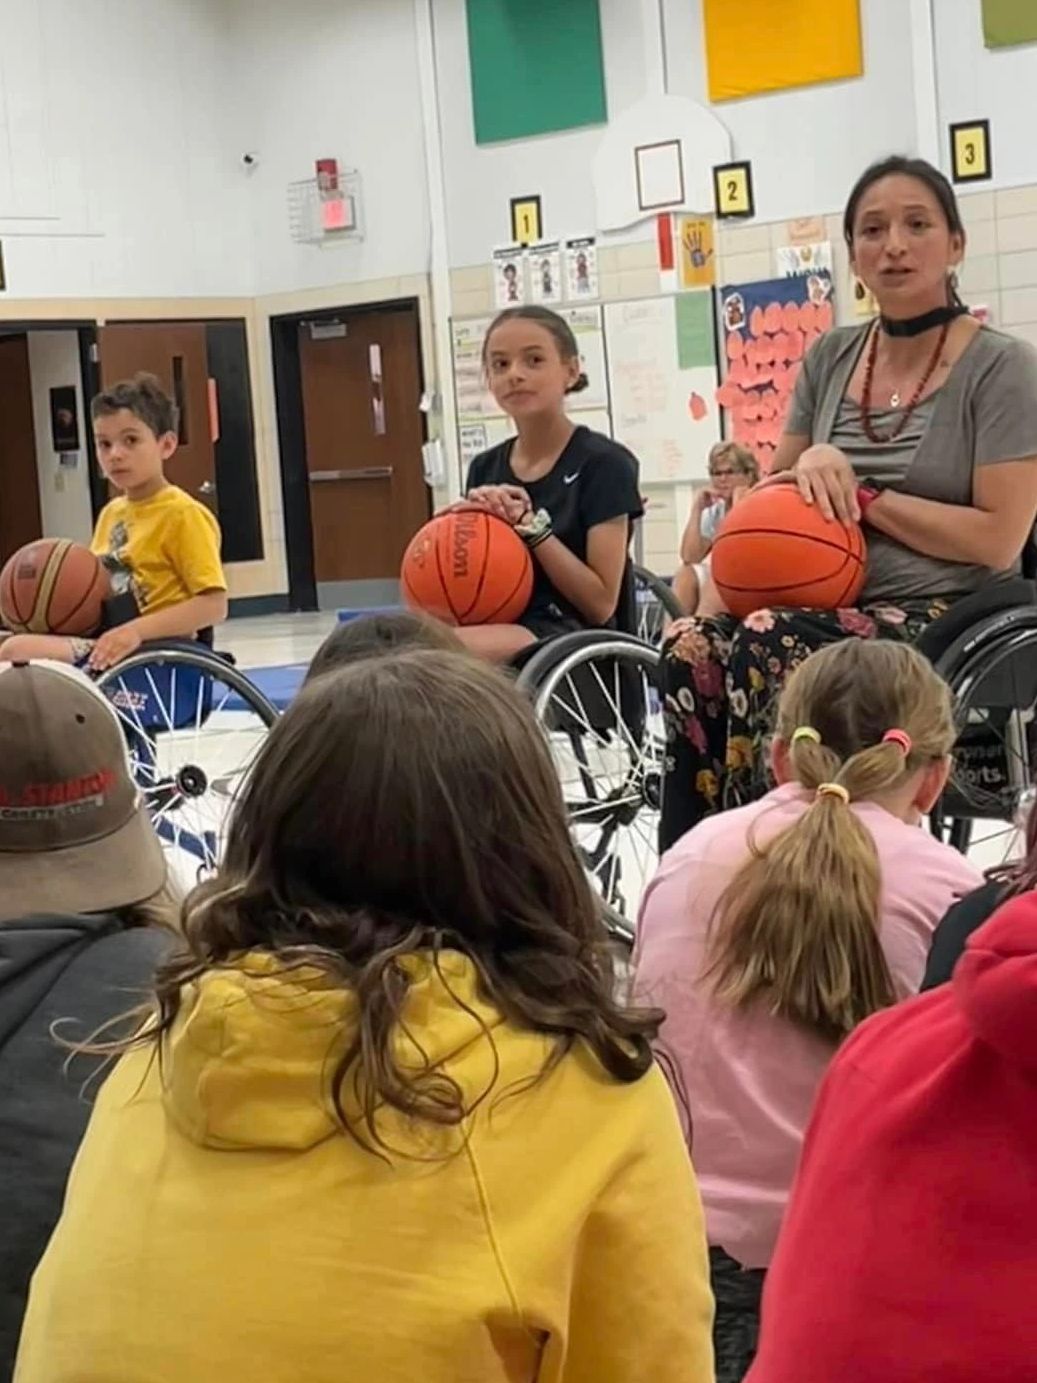 Patty speaking to a group of kids. Her kids are sitting in wheelchairs with basketballs on their lap